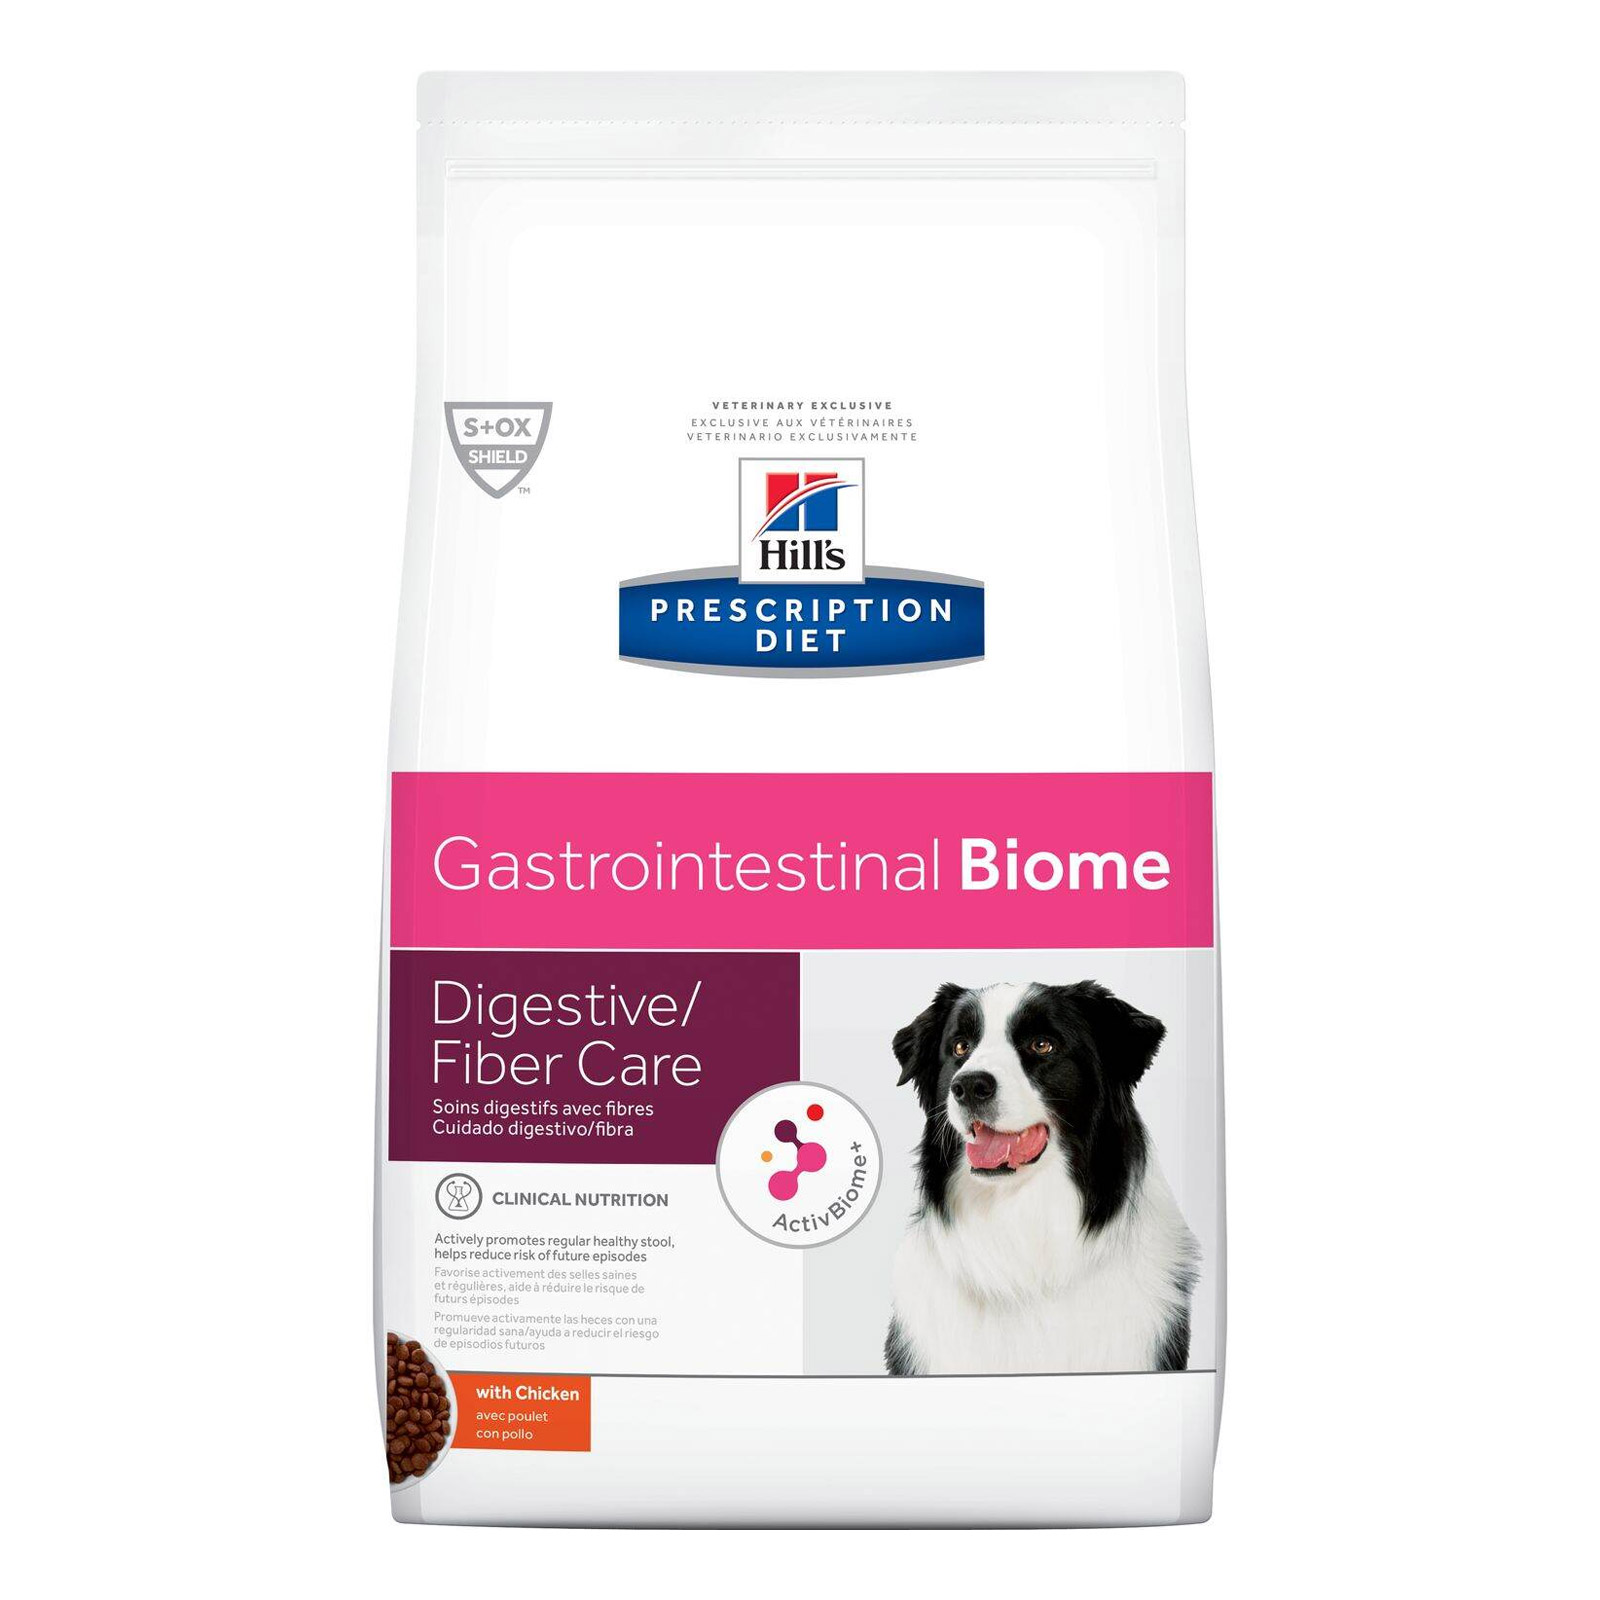 Hill's Prescription Diet Gastrointestinal Biome Dry Dog Food for Food